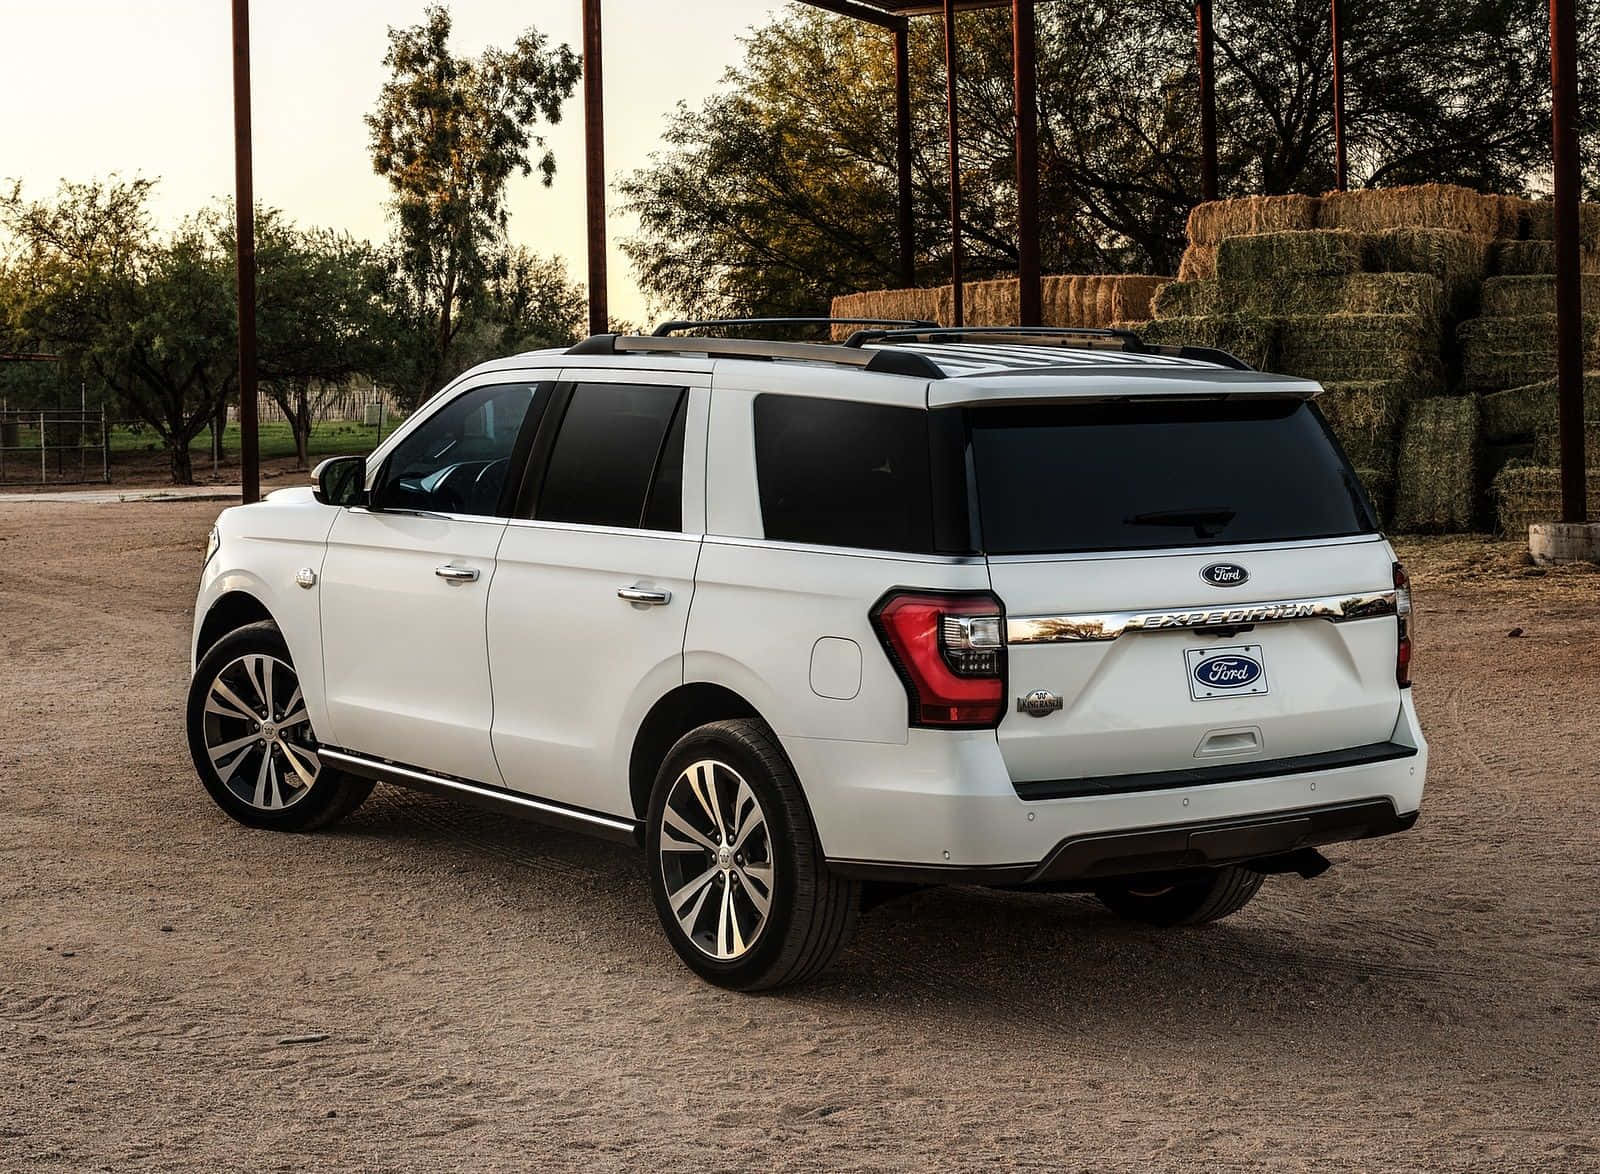 Ford Expedition: A Reliable Family SUV Wallpaper